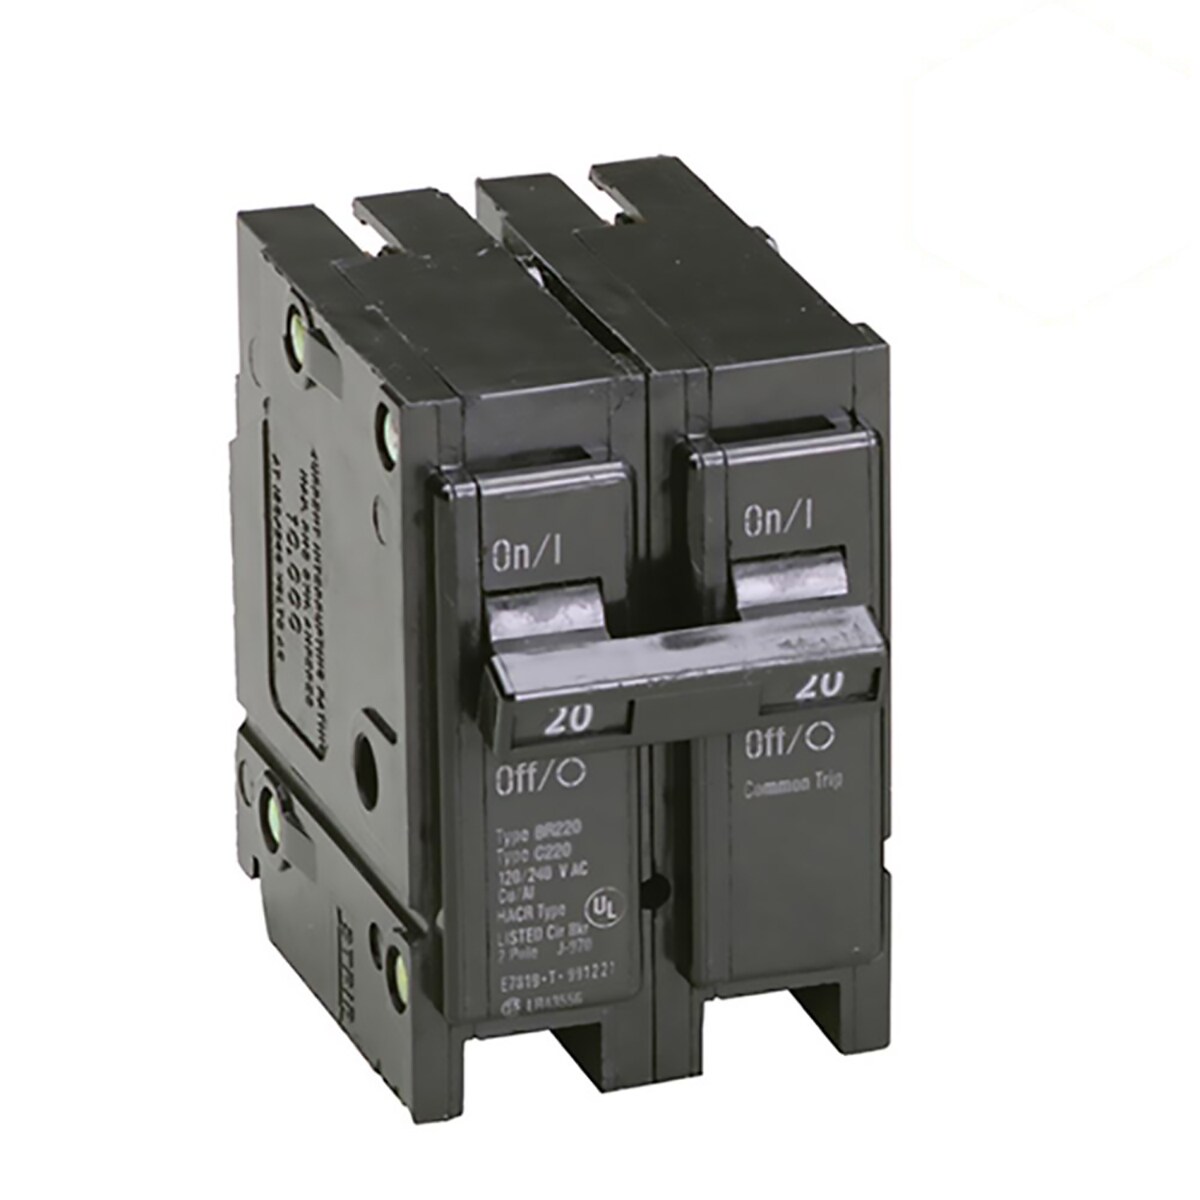 New 15A Cutler Hammer CH215 CTL-CH HACR Type Circuit Breakers 120V 240V 2 Pole